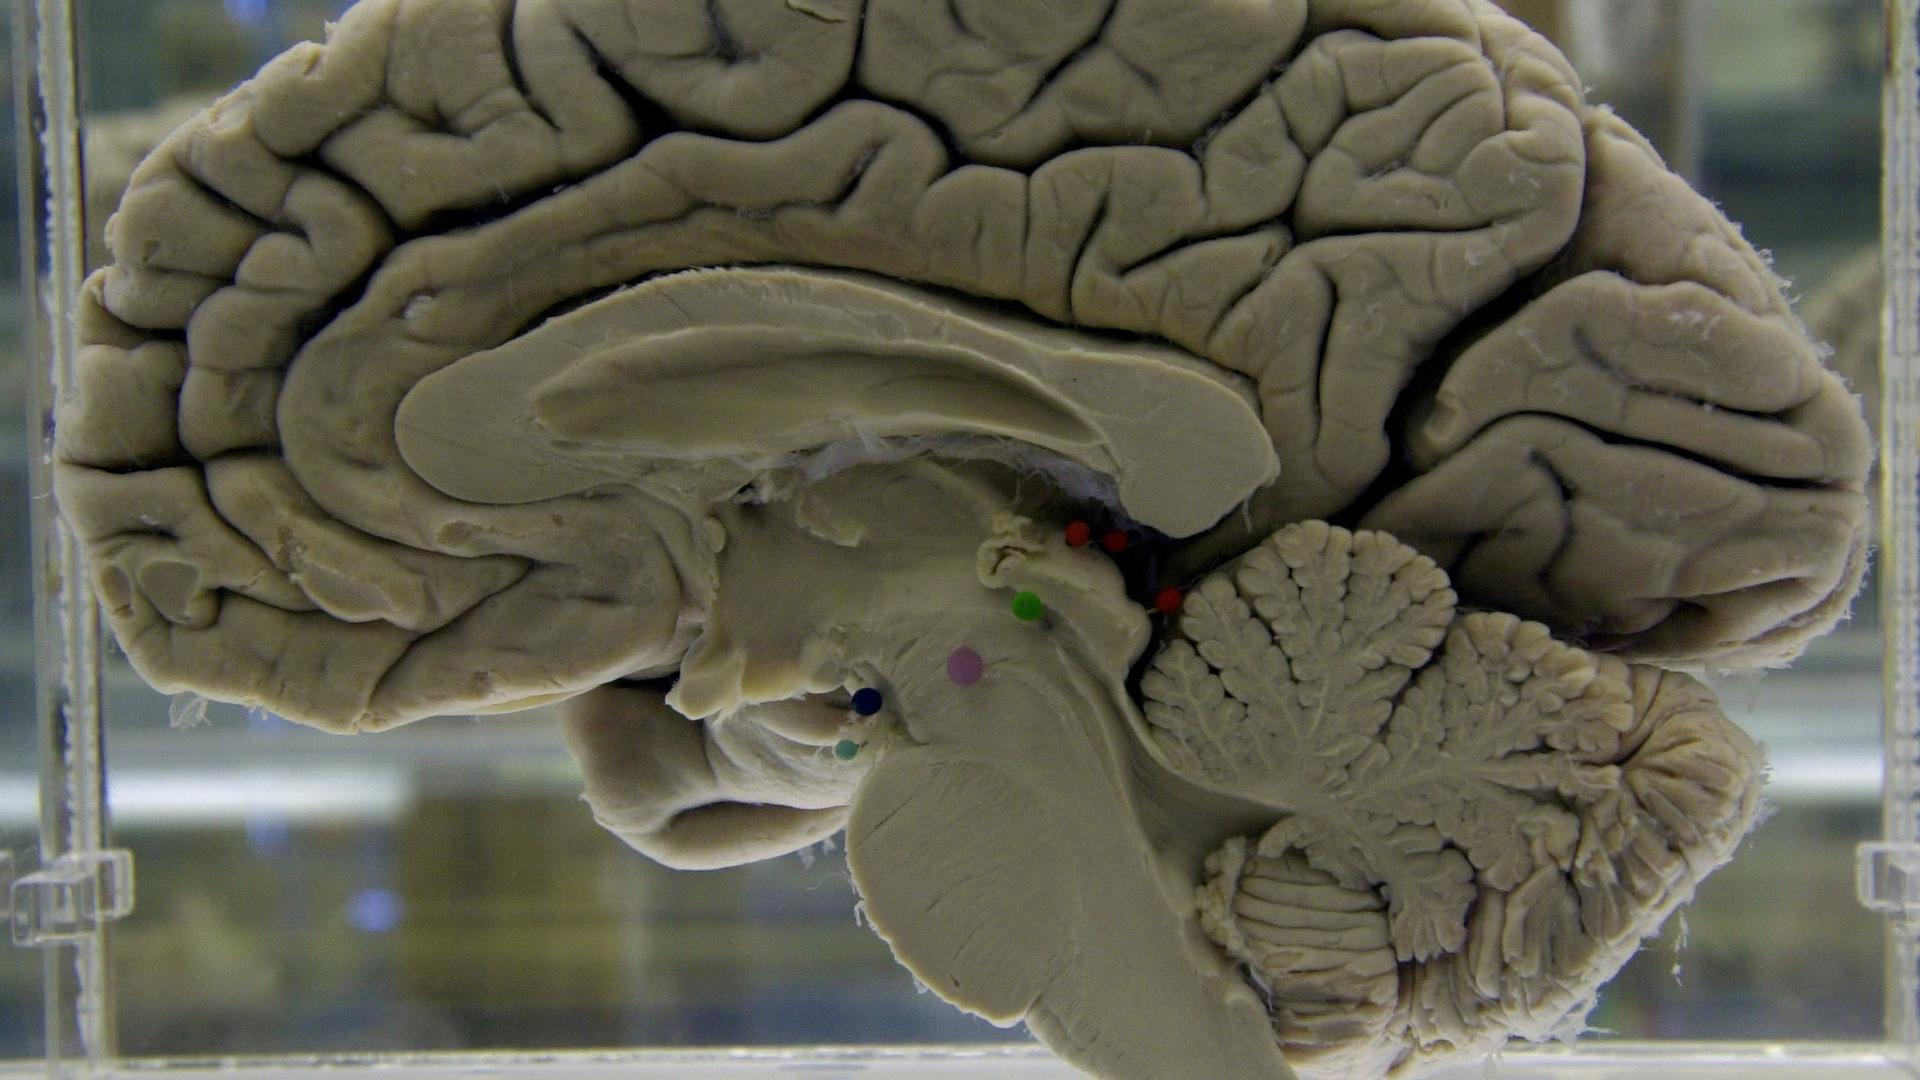 Side view of a cross section of a human brain in glass